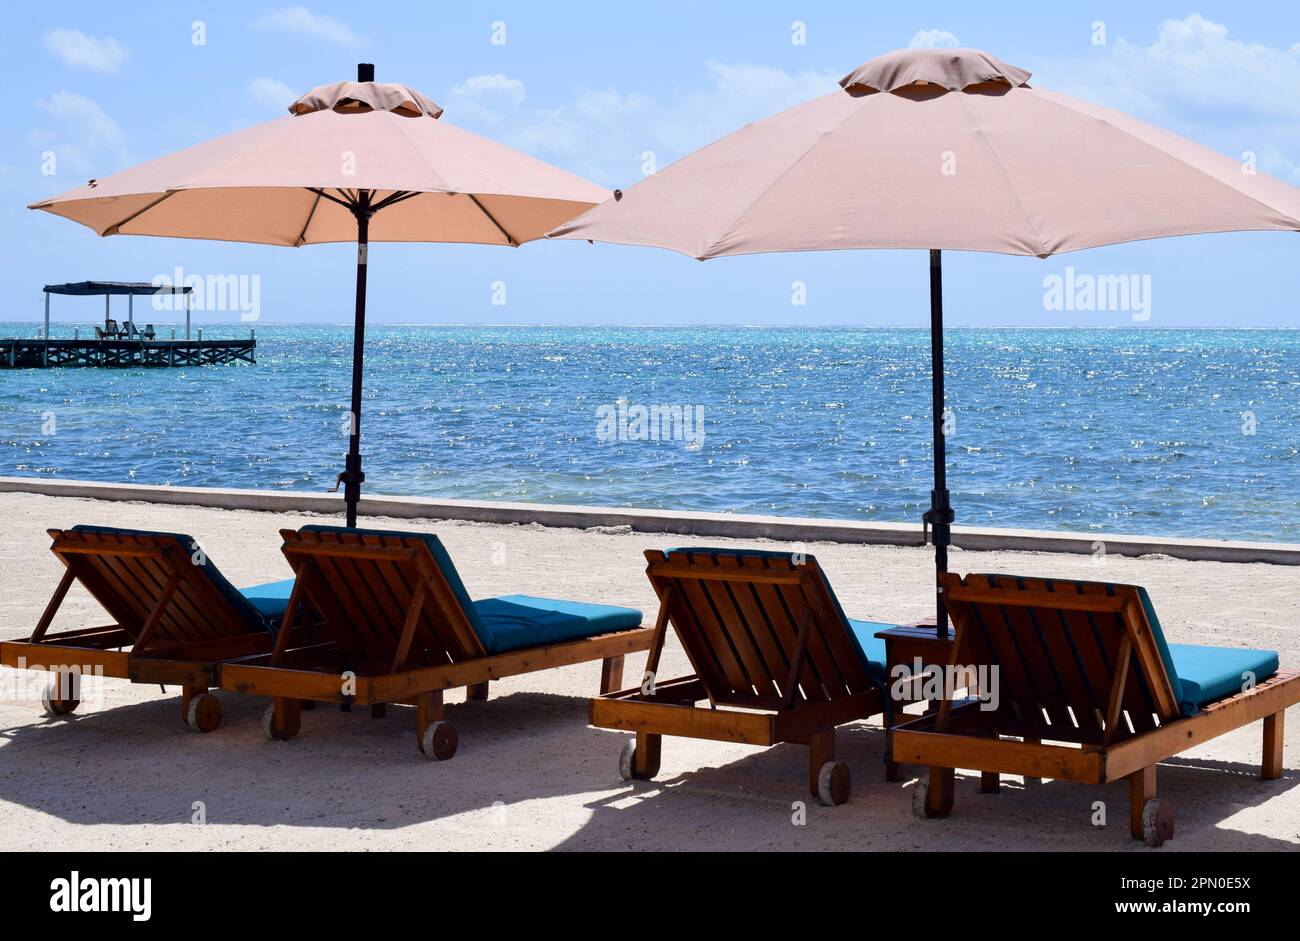 Lounge chairs at the beach under parasols and facing the sea on a sunny day in San Pedro, Ambergris Caye, Belize, Caribbean. Stock Photo